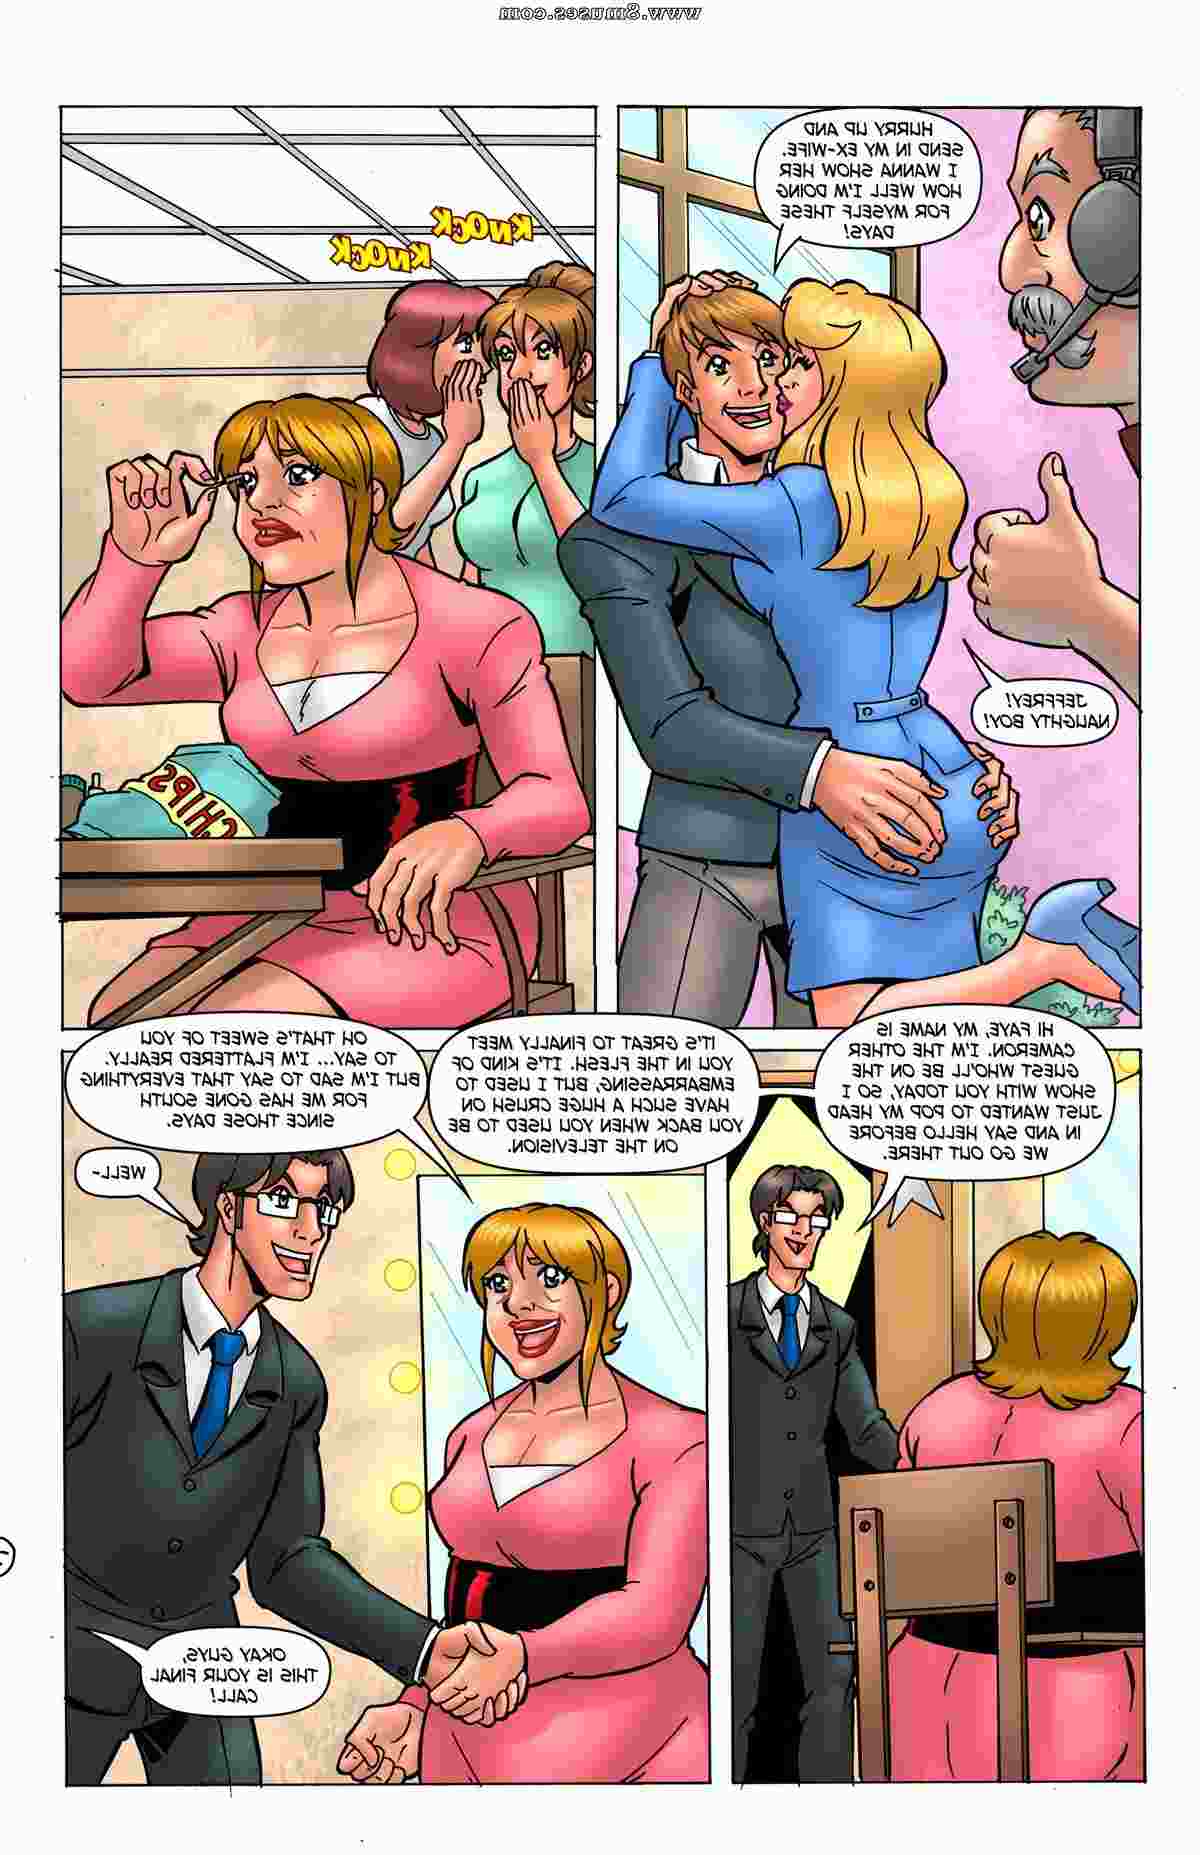 Expansionfan-Comics/The-Midday-Show The_Midday_Show__8muses_-_Sex_and_Porn_Comics_4.jpg